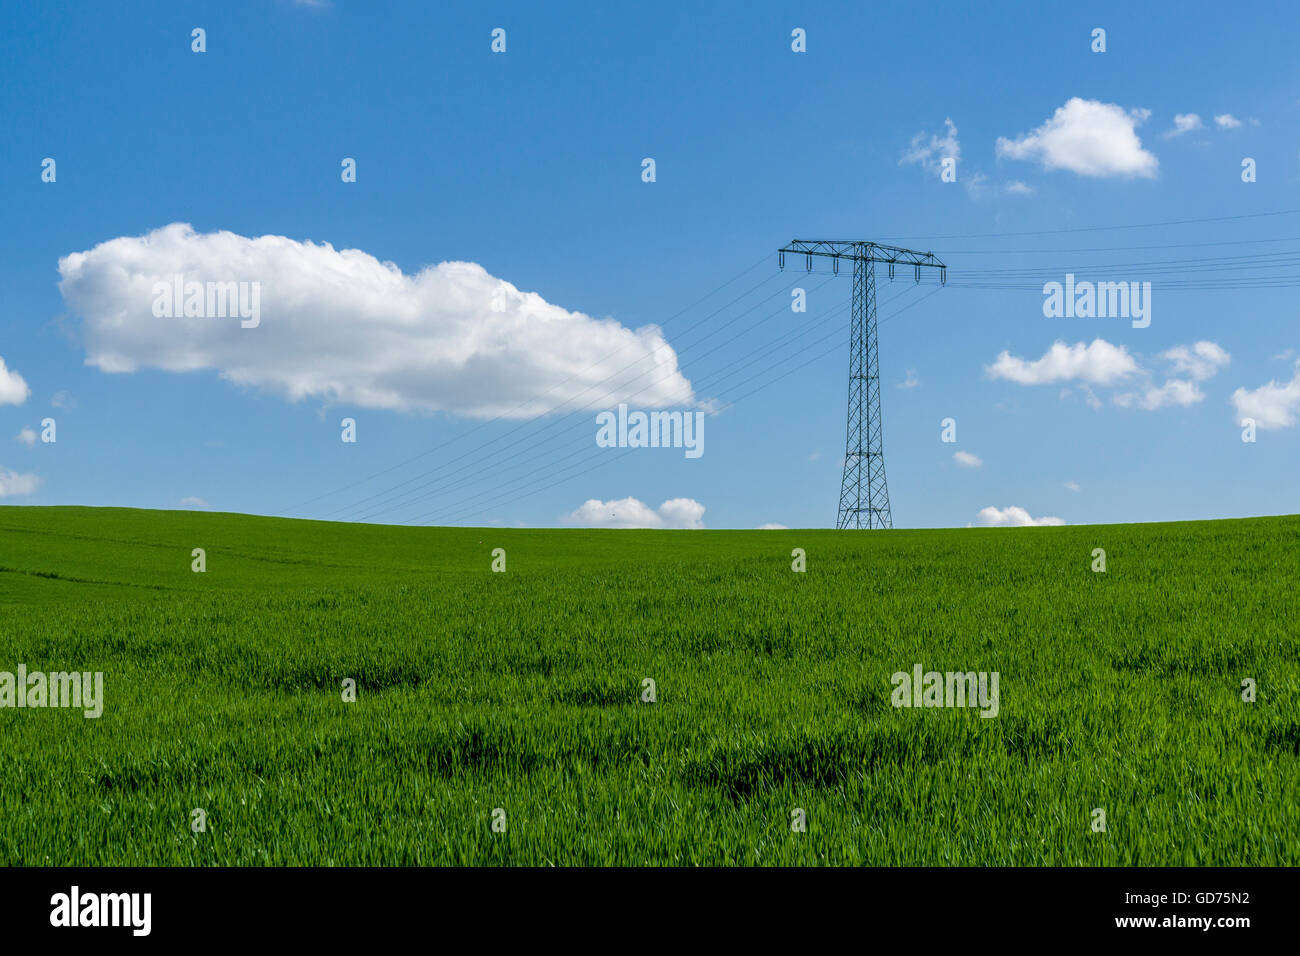 Agricultural landscape with overhead powerlines, green fields and cloudy blue sky, Cunnersdorf, Saxony, Germany Stock Photo